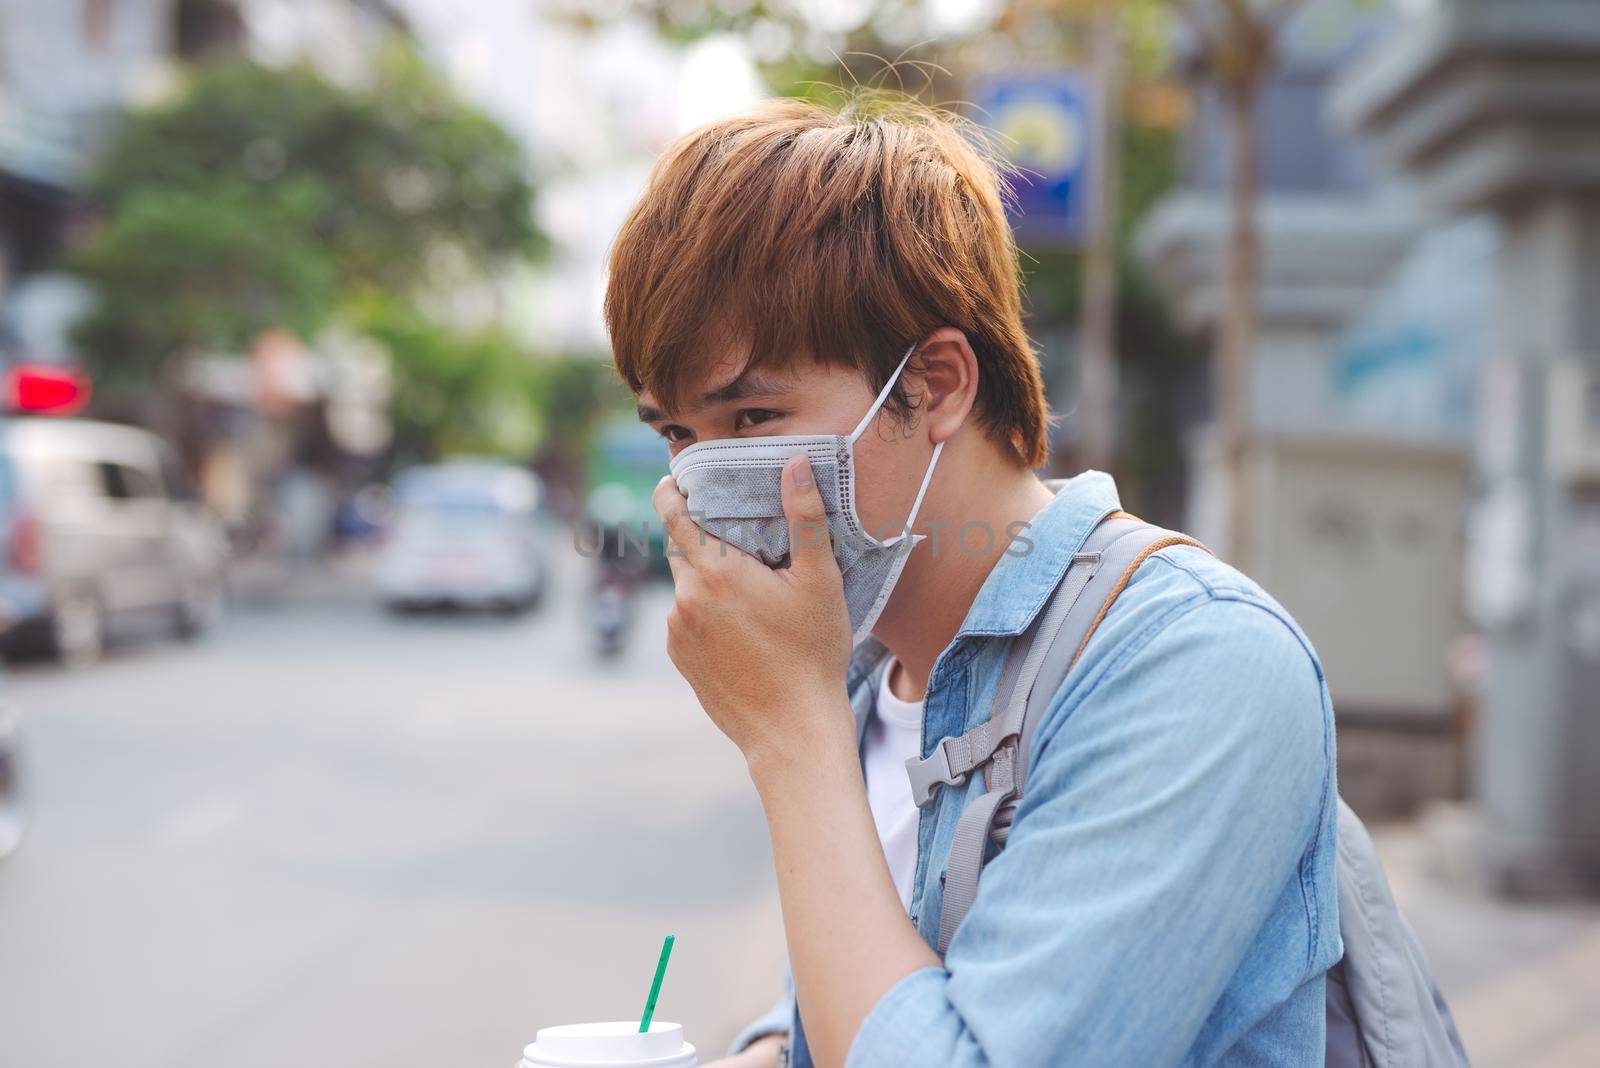 Asian man in the street wearing protective masks., Sick man with flu wearing mask and blowing nose into napkin as epidemic flu concept on the street.